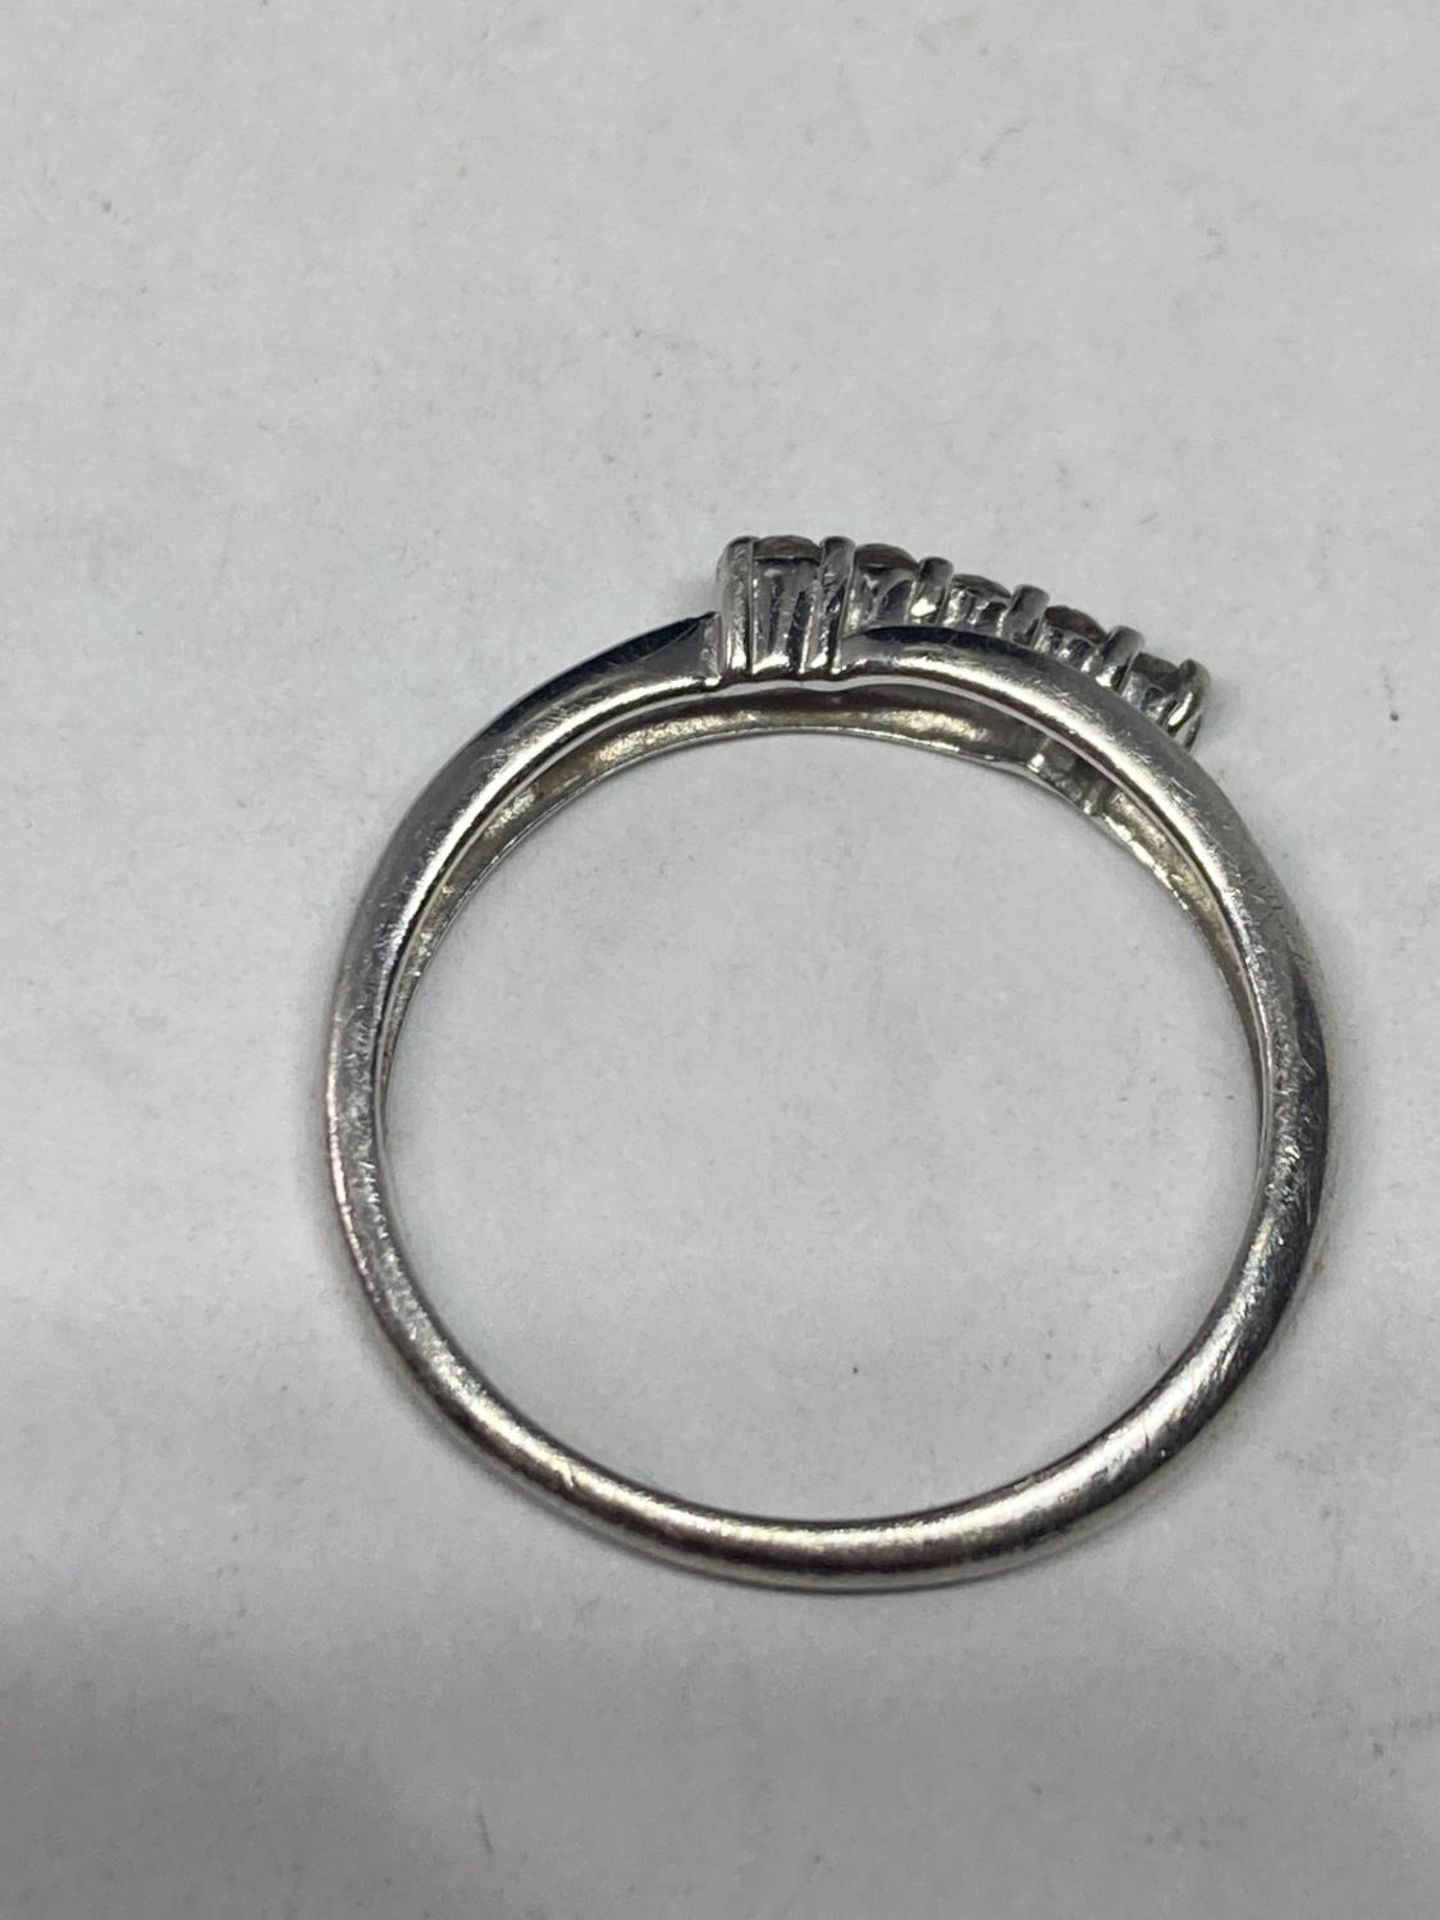 A 9 CARAT WHITE GOLD RING WITH FIVE IN LINE STONES SIZE N - Image 3 of 3